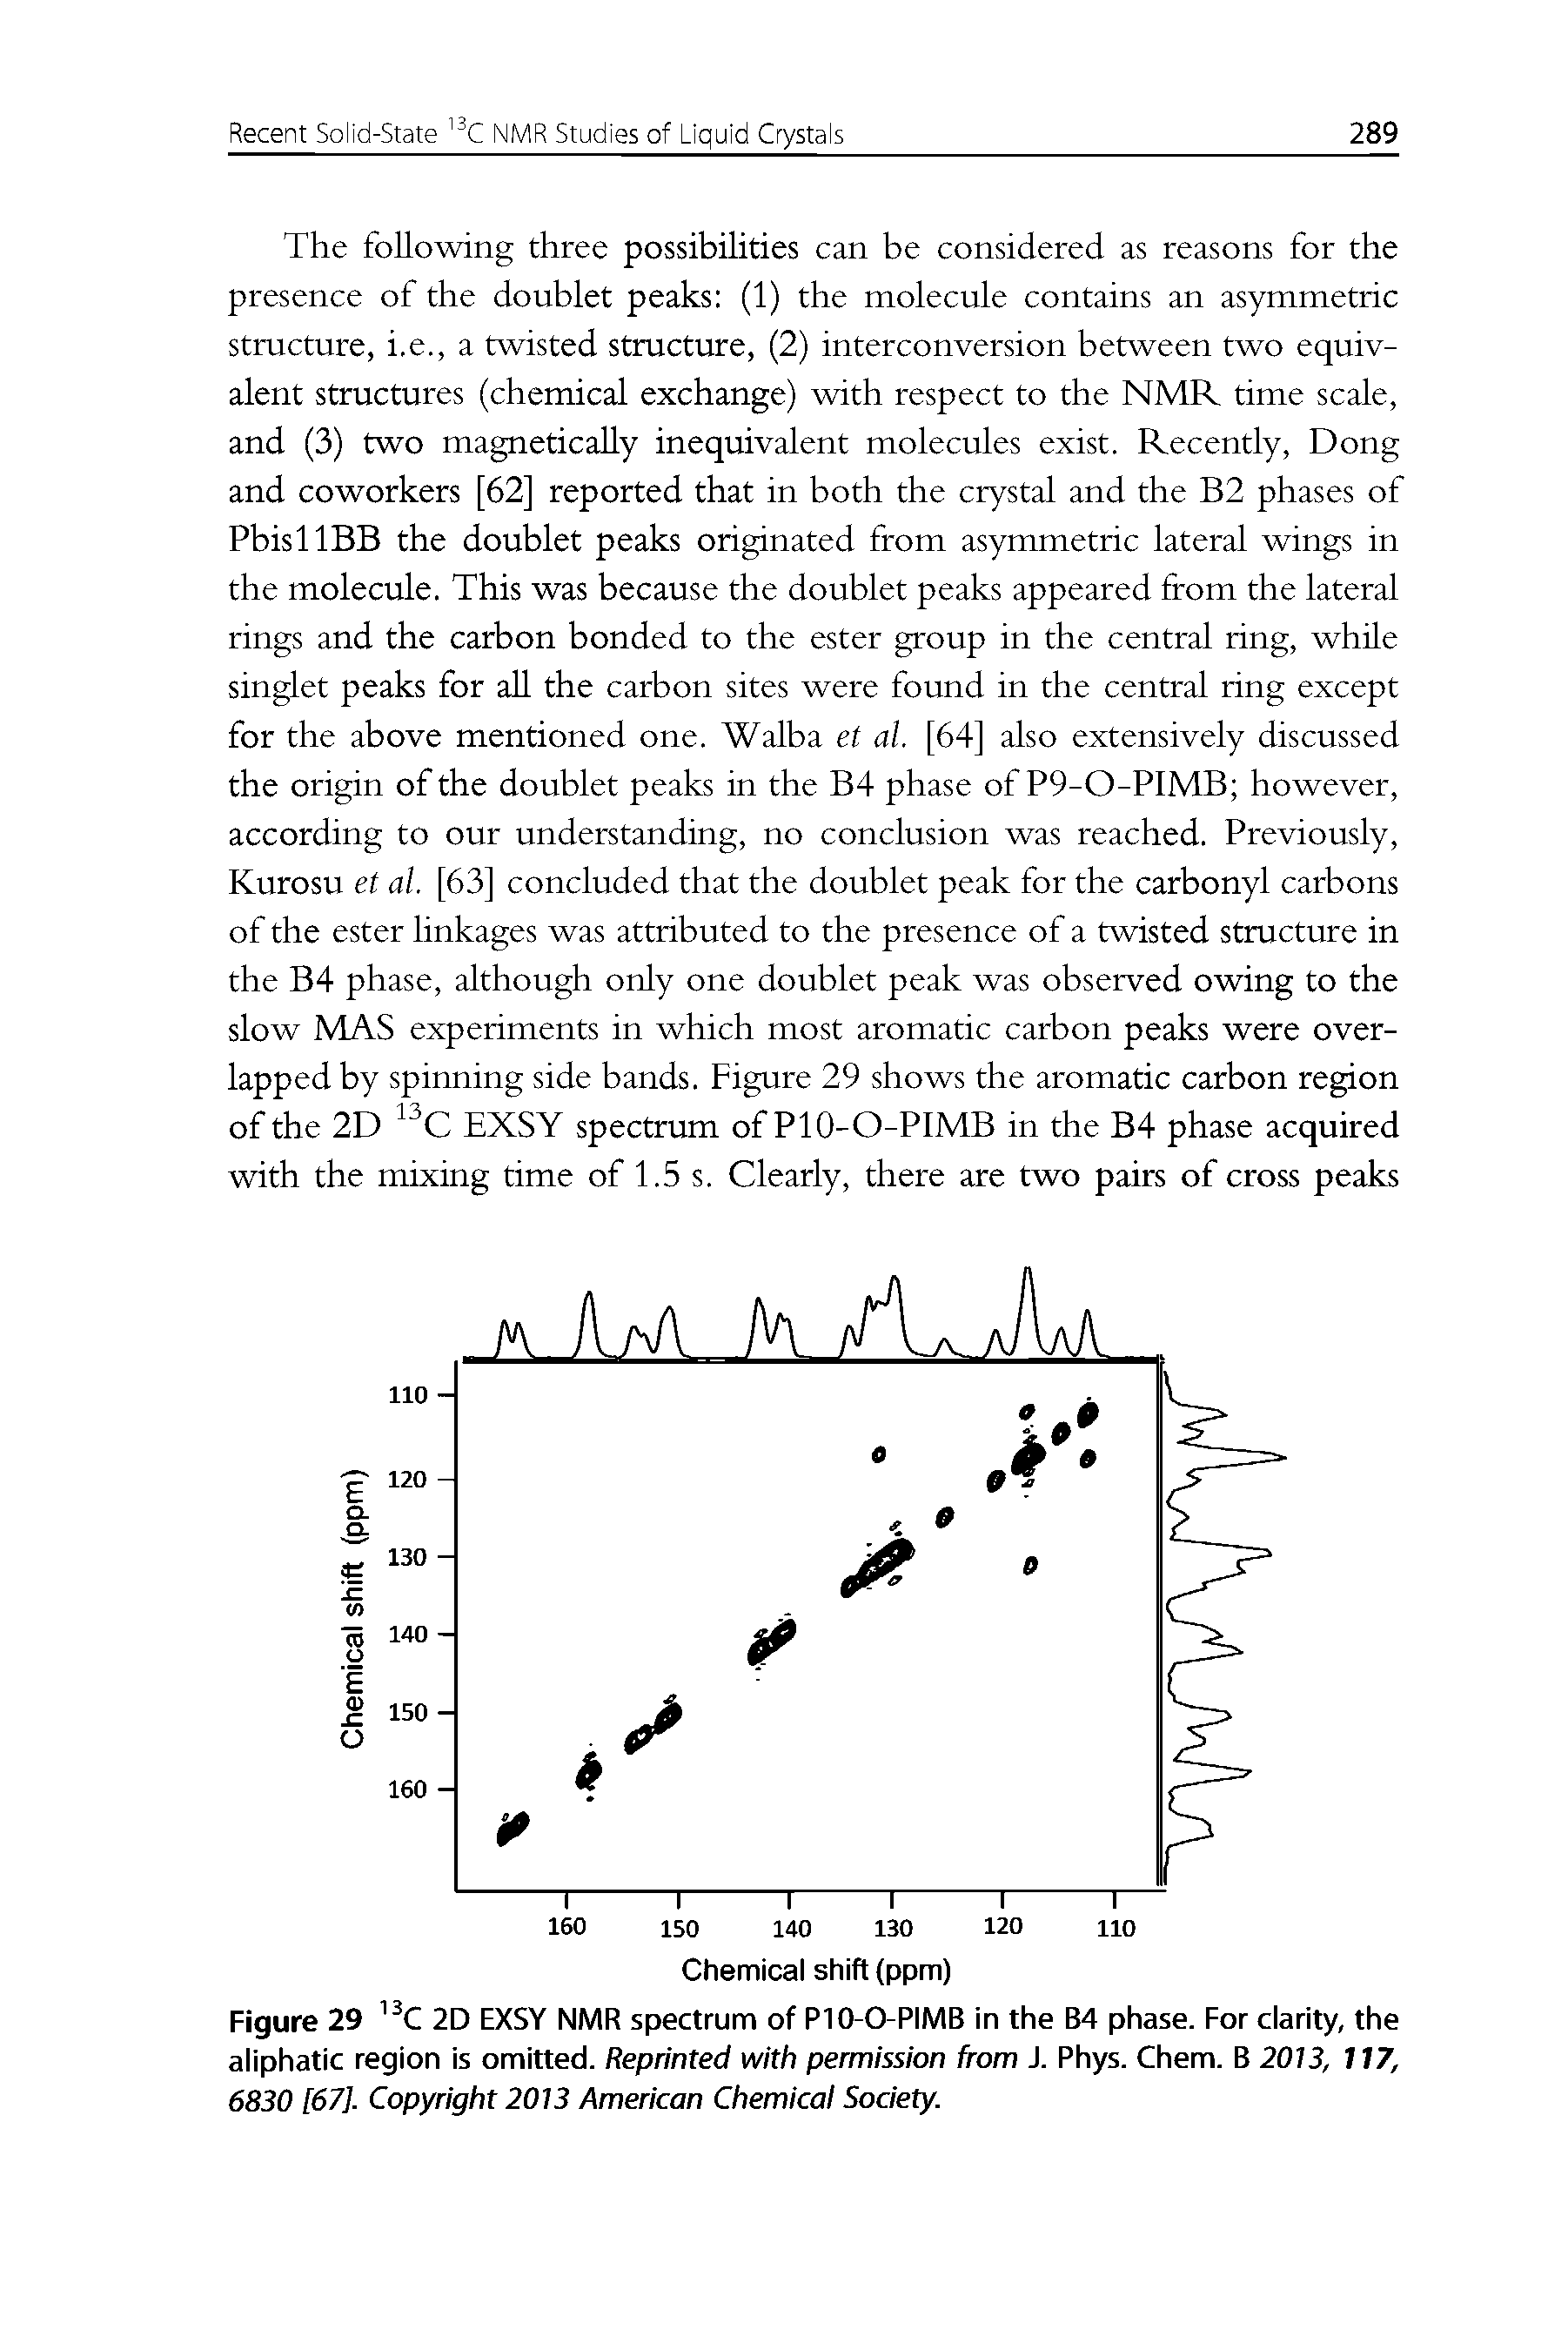 Figure 29 2D EXSY NMR spectrum of PIO-O-PIMB in the B4 phase. For clarity, the aliphatic region is omitted. Reprinted with permission from J. Phys. Chem. B 2013, 117, 6830 [67], Copyright 2013 American Chemical Society.